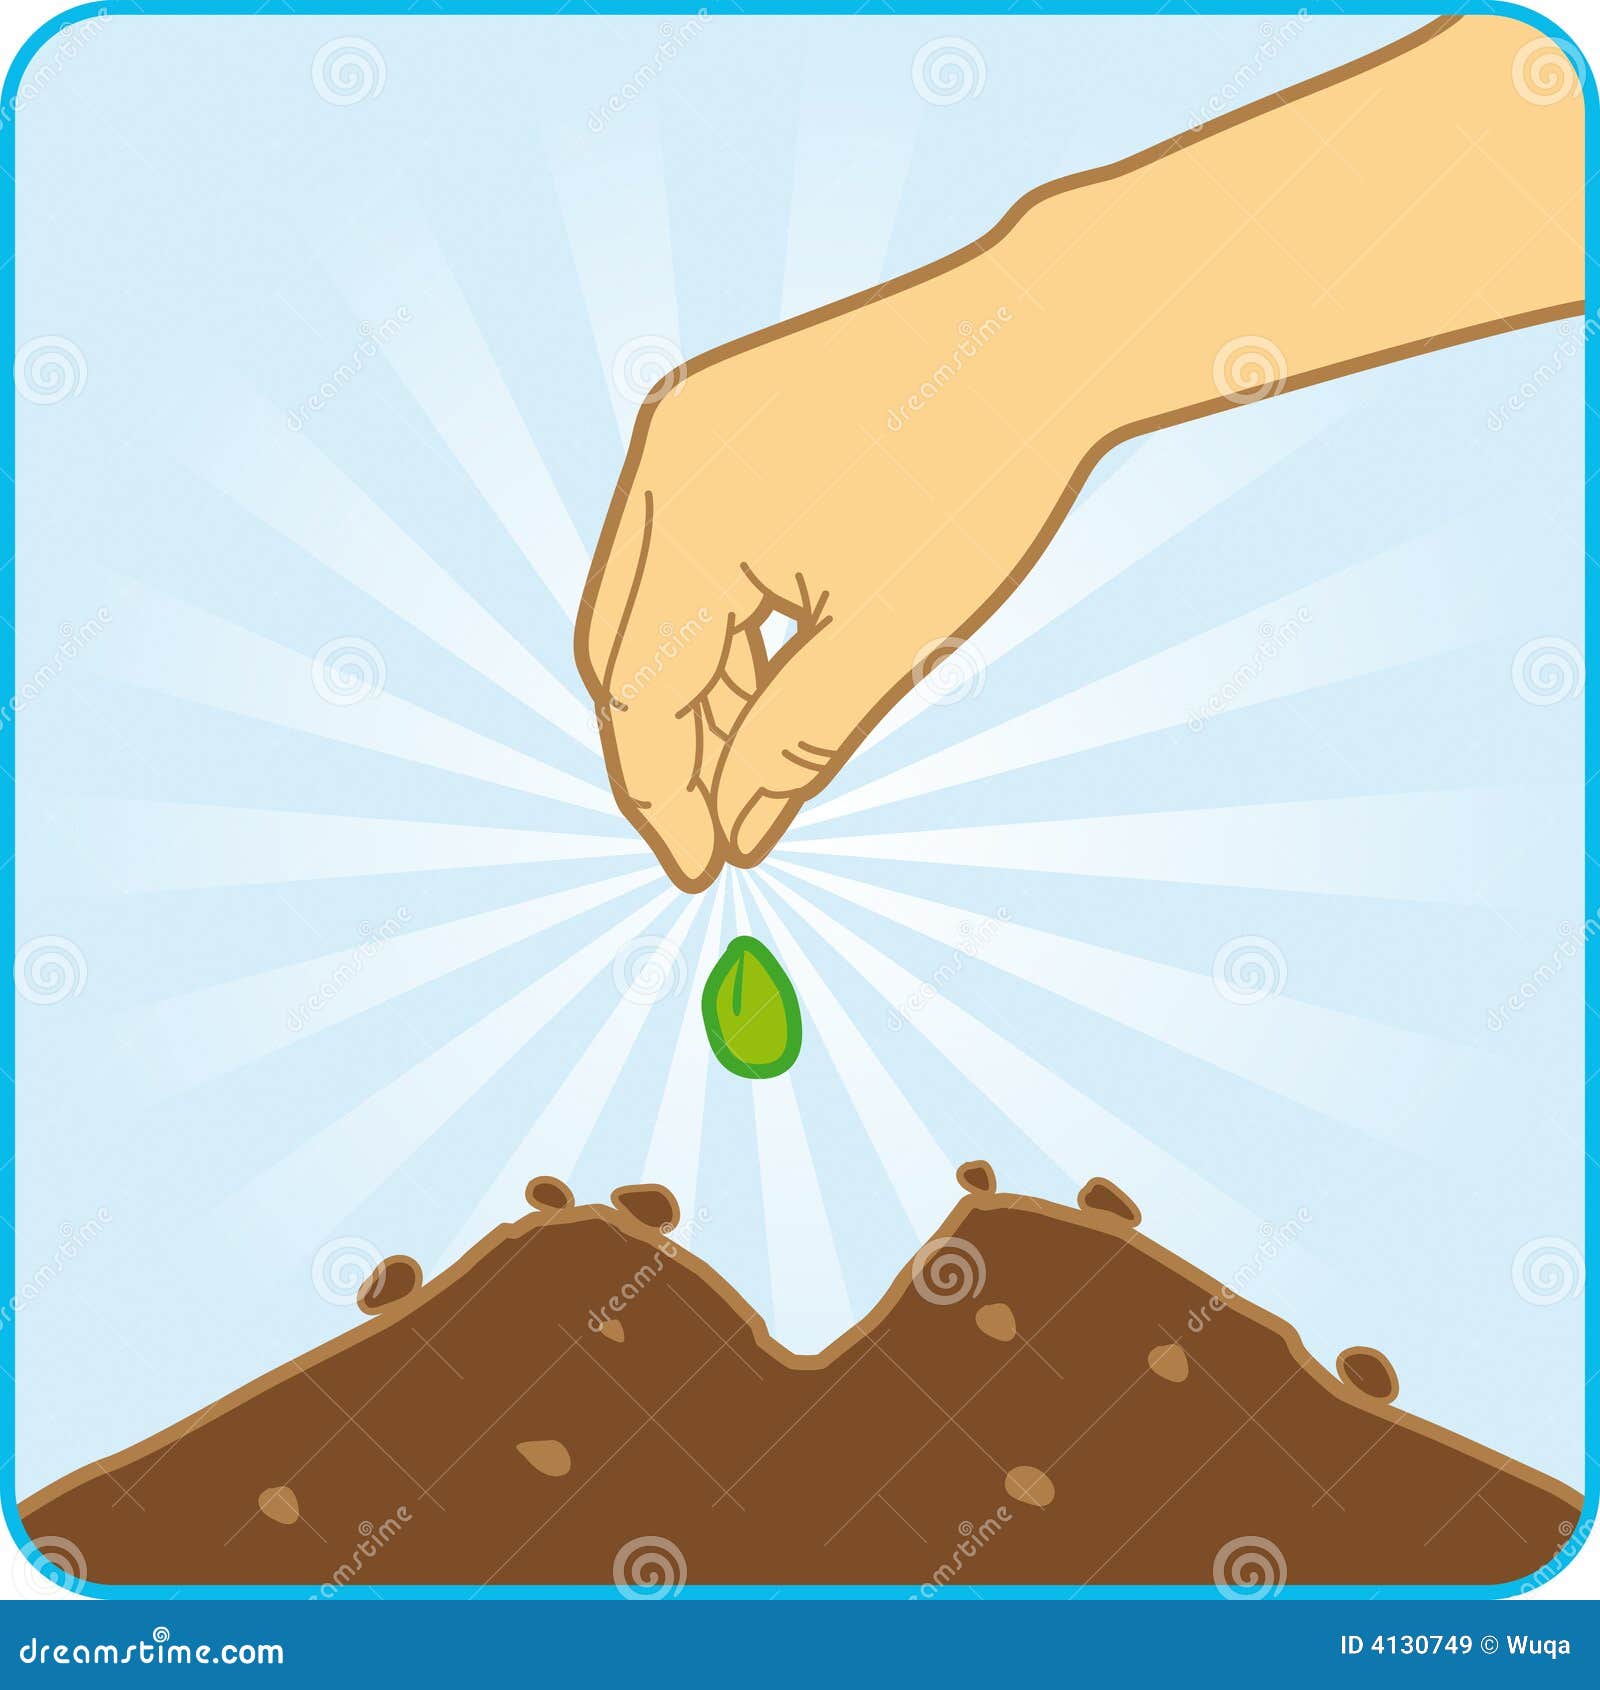 clipart planting seeds - photo #4